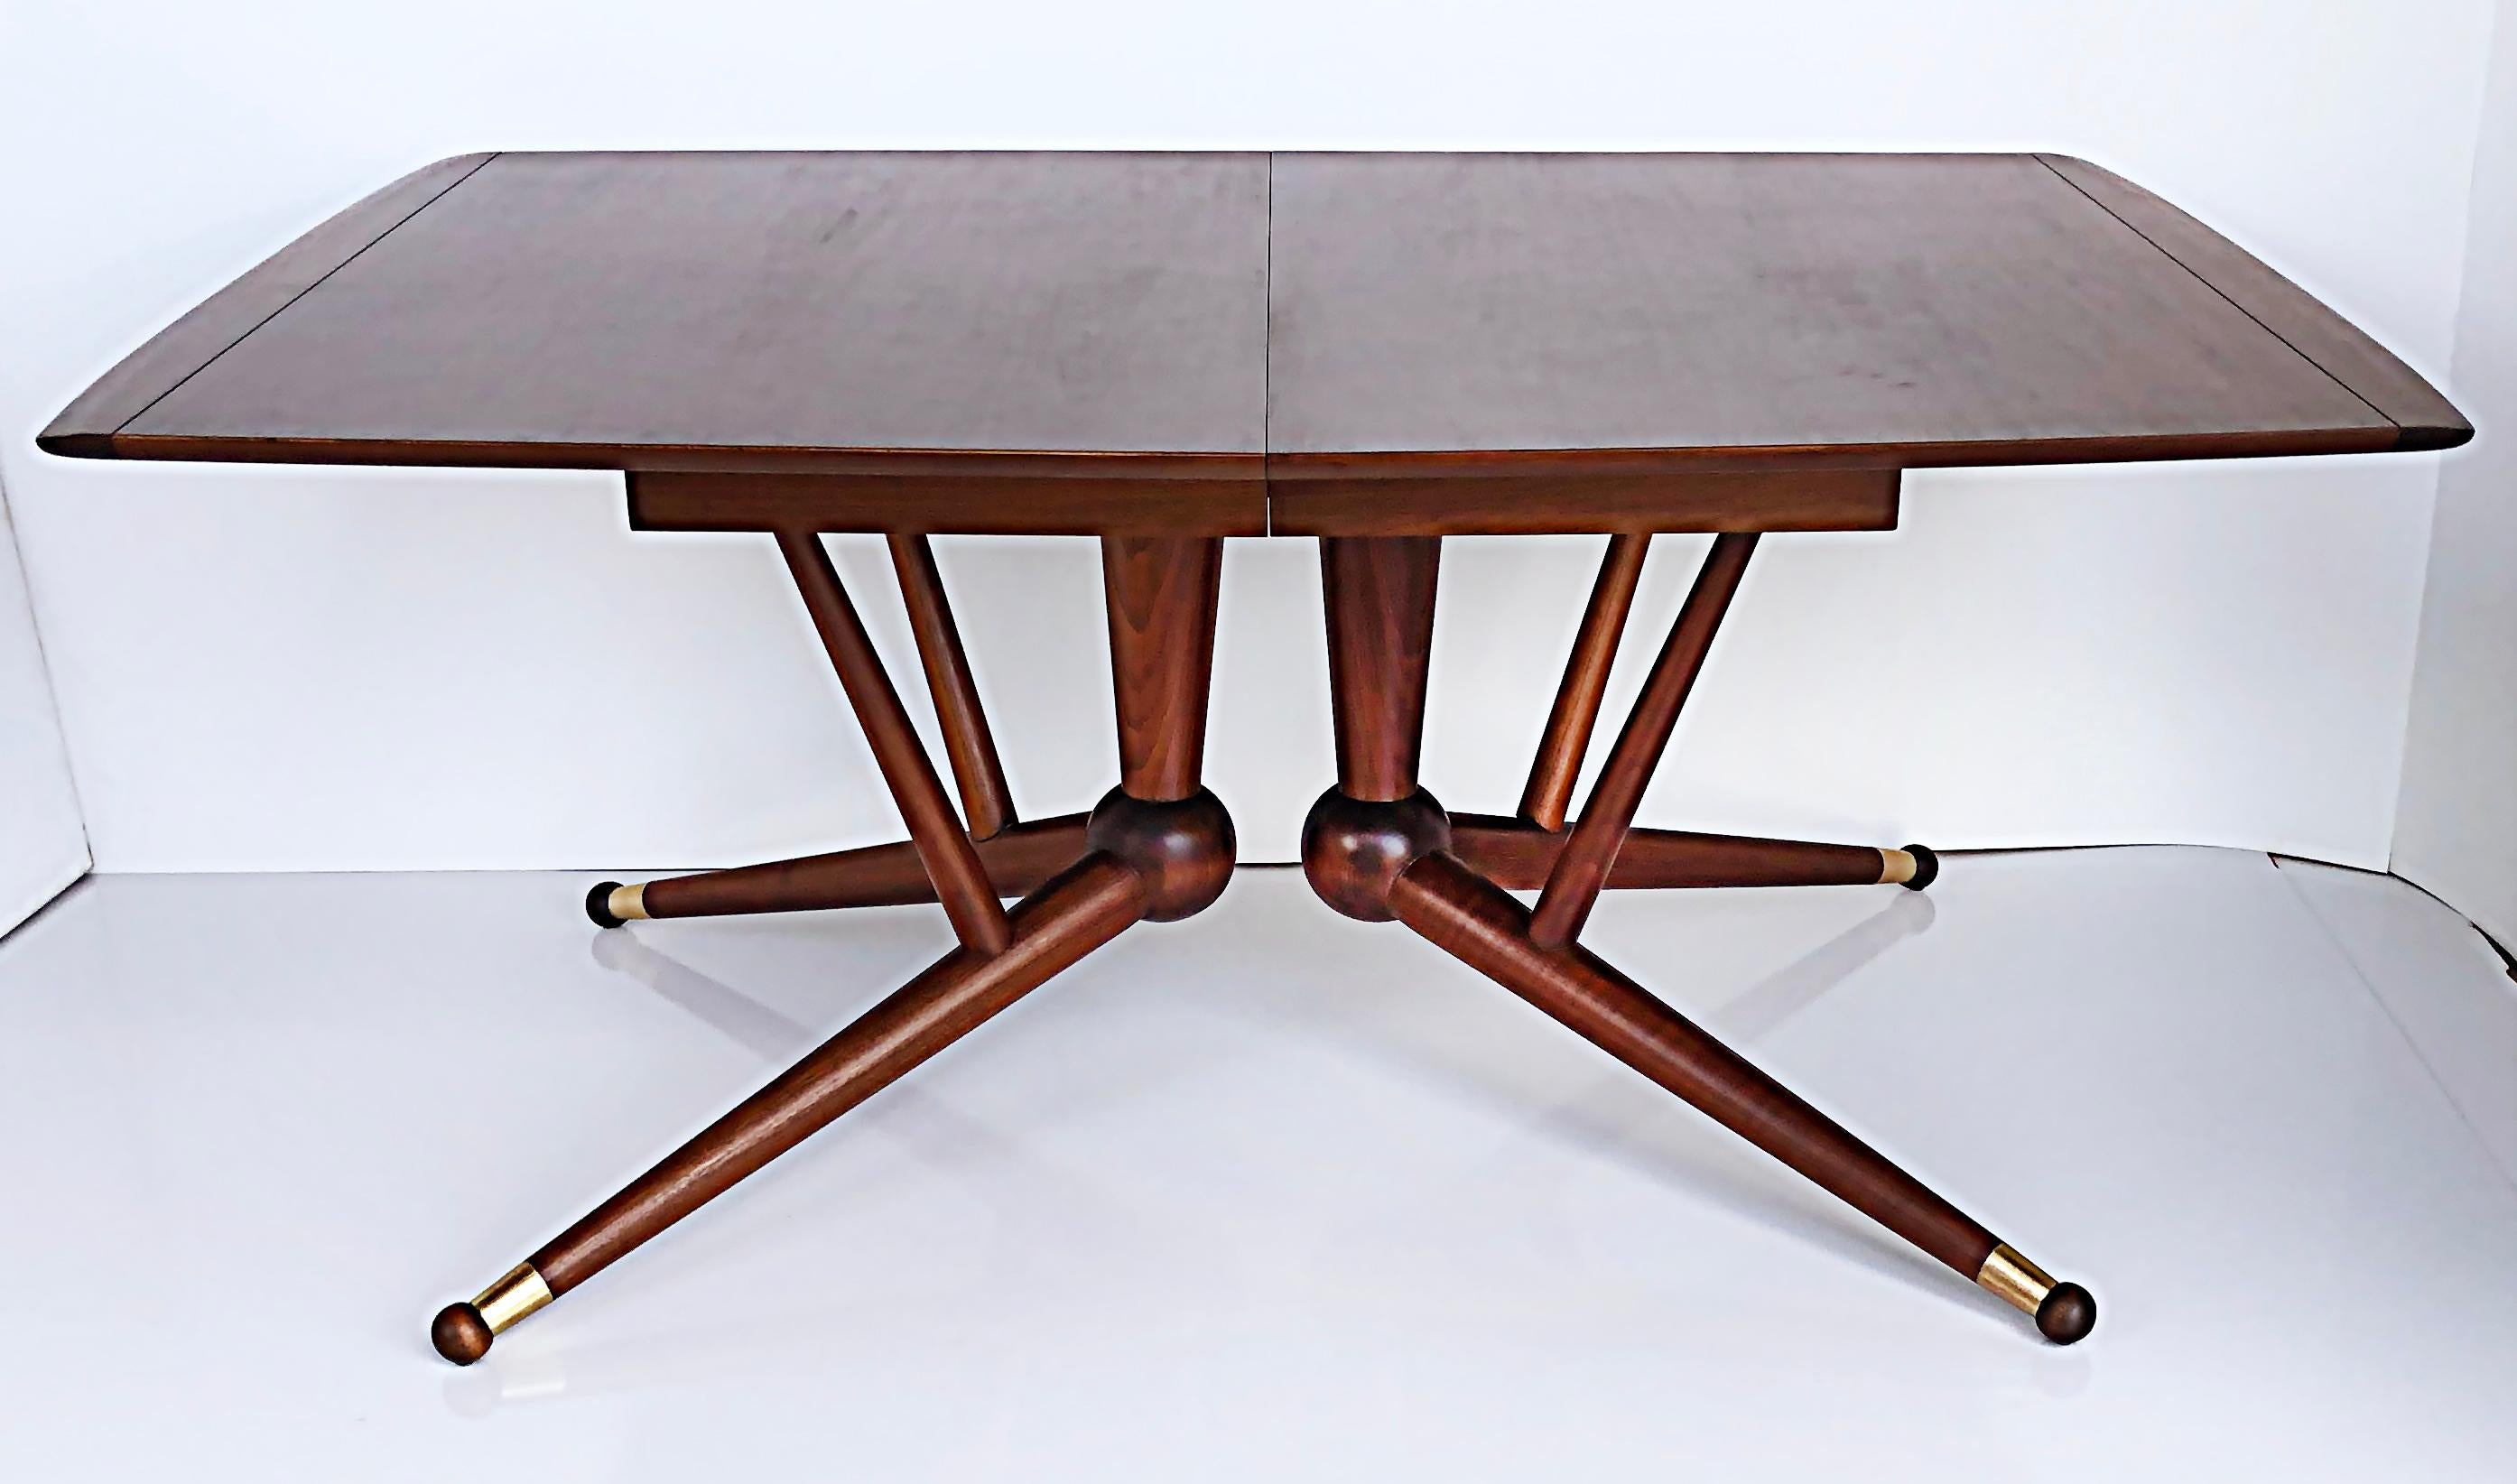 American Mid-Century Modernist Expandable Dining Table with Two Wood Leaves For Sale 3